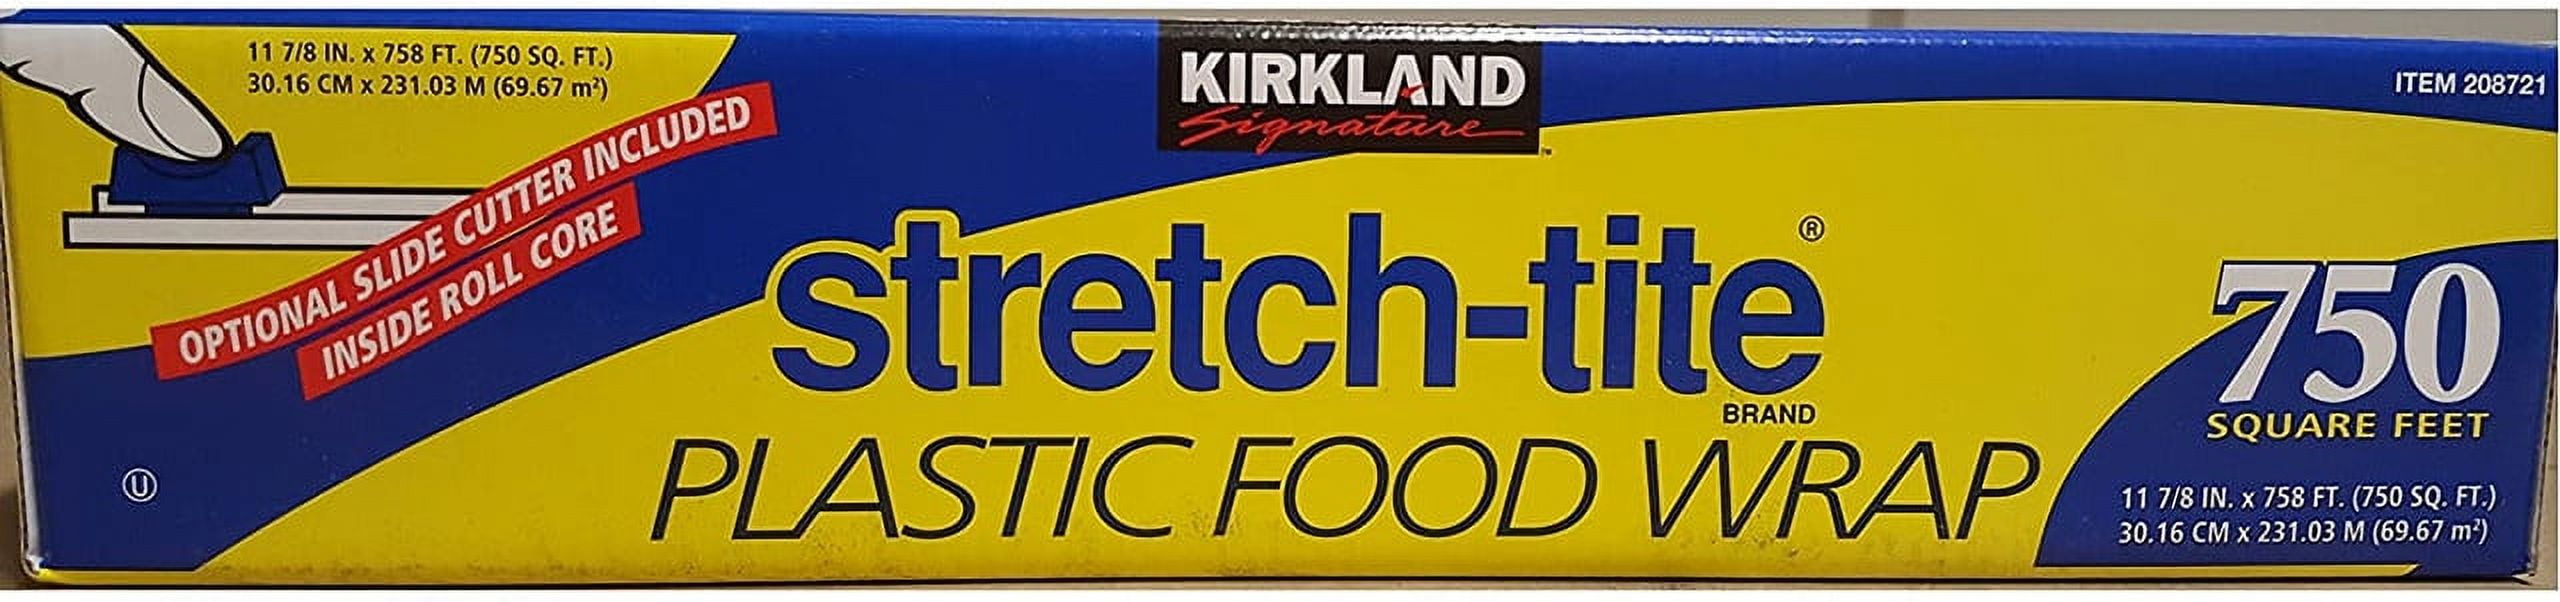 Kirkland Stretch-Tite Plastic Wrap With Slide Cutter, 11 7/8 x 758' For  Sale In-store & Online - Beacon Tattoo Supply in Las Vegas, NV